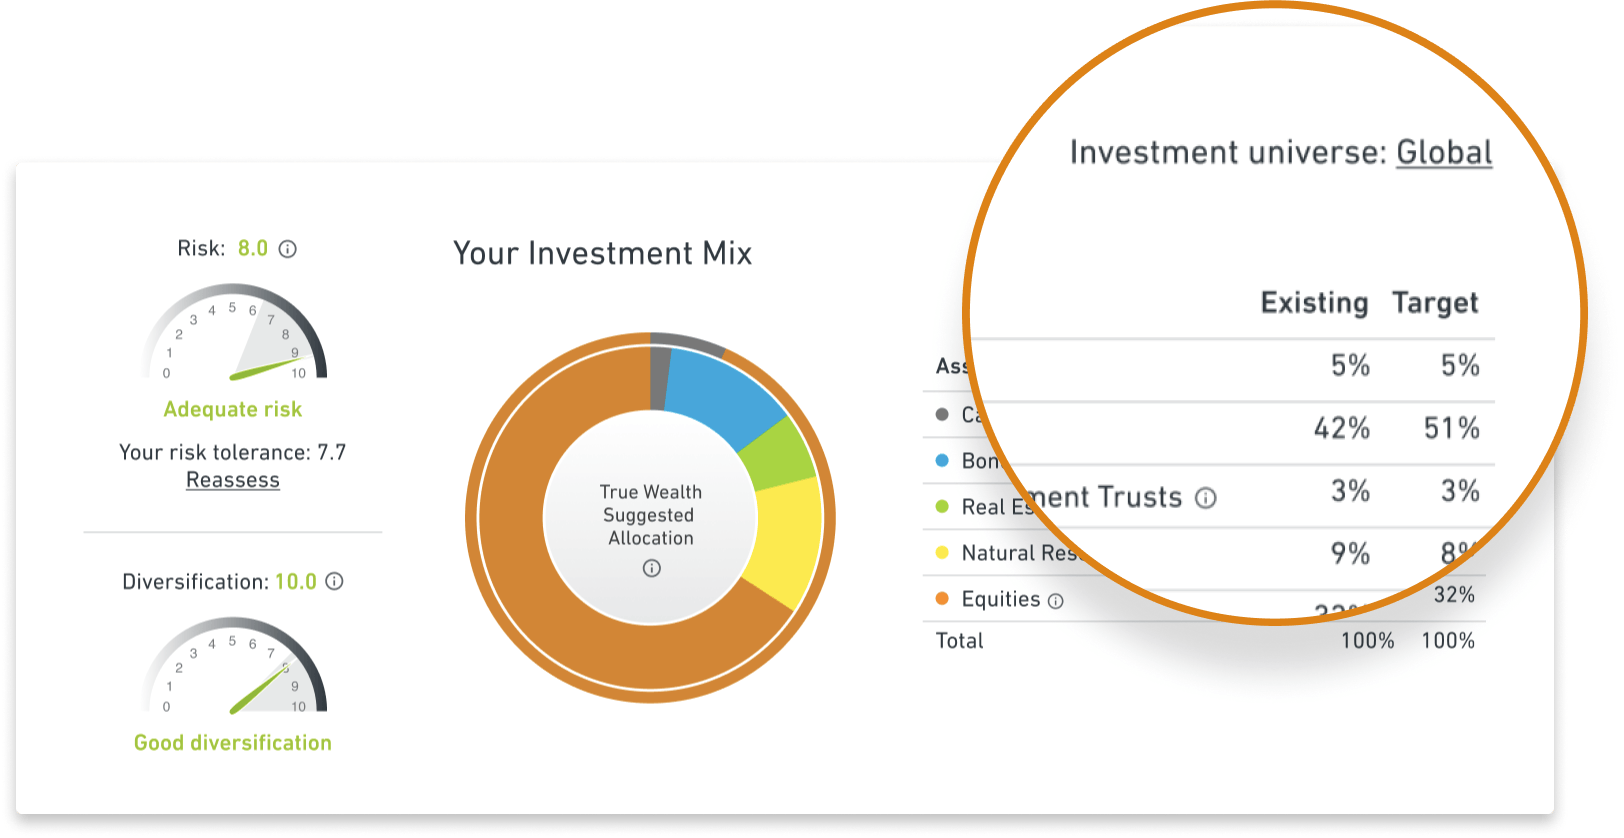 Investment universe